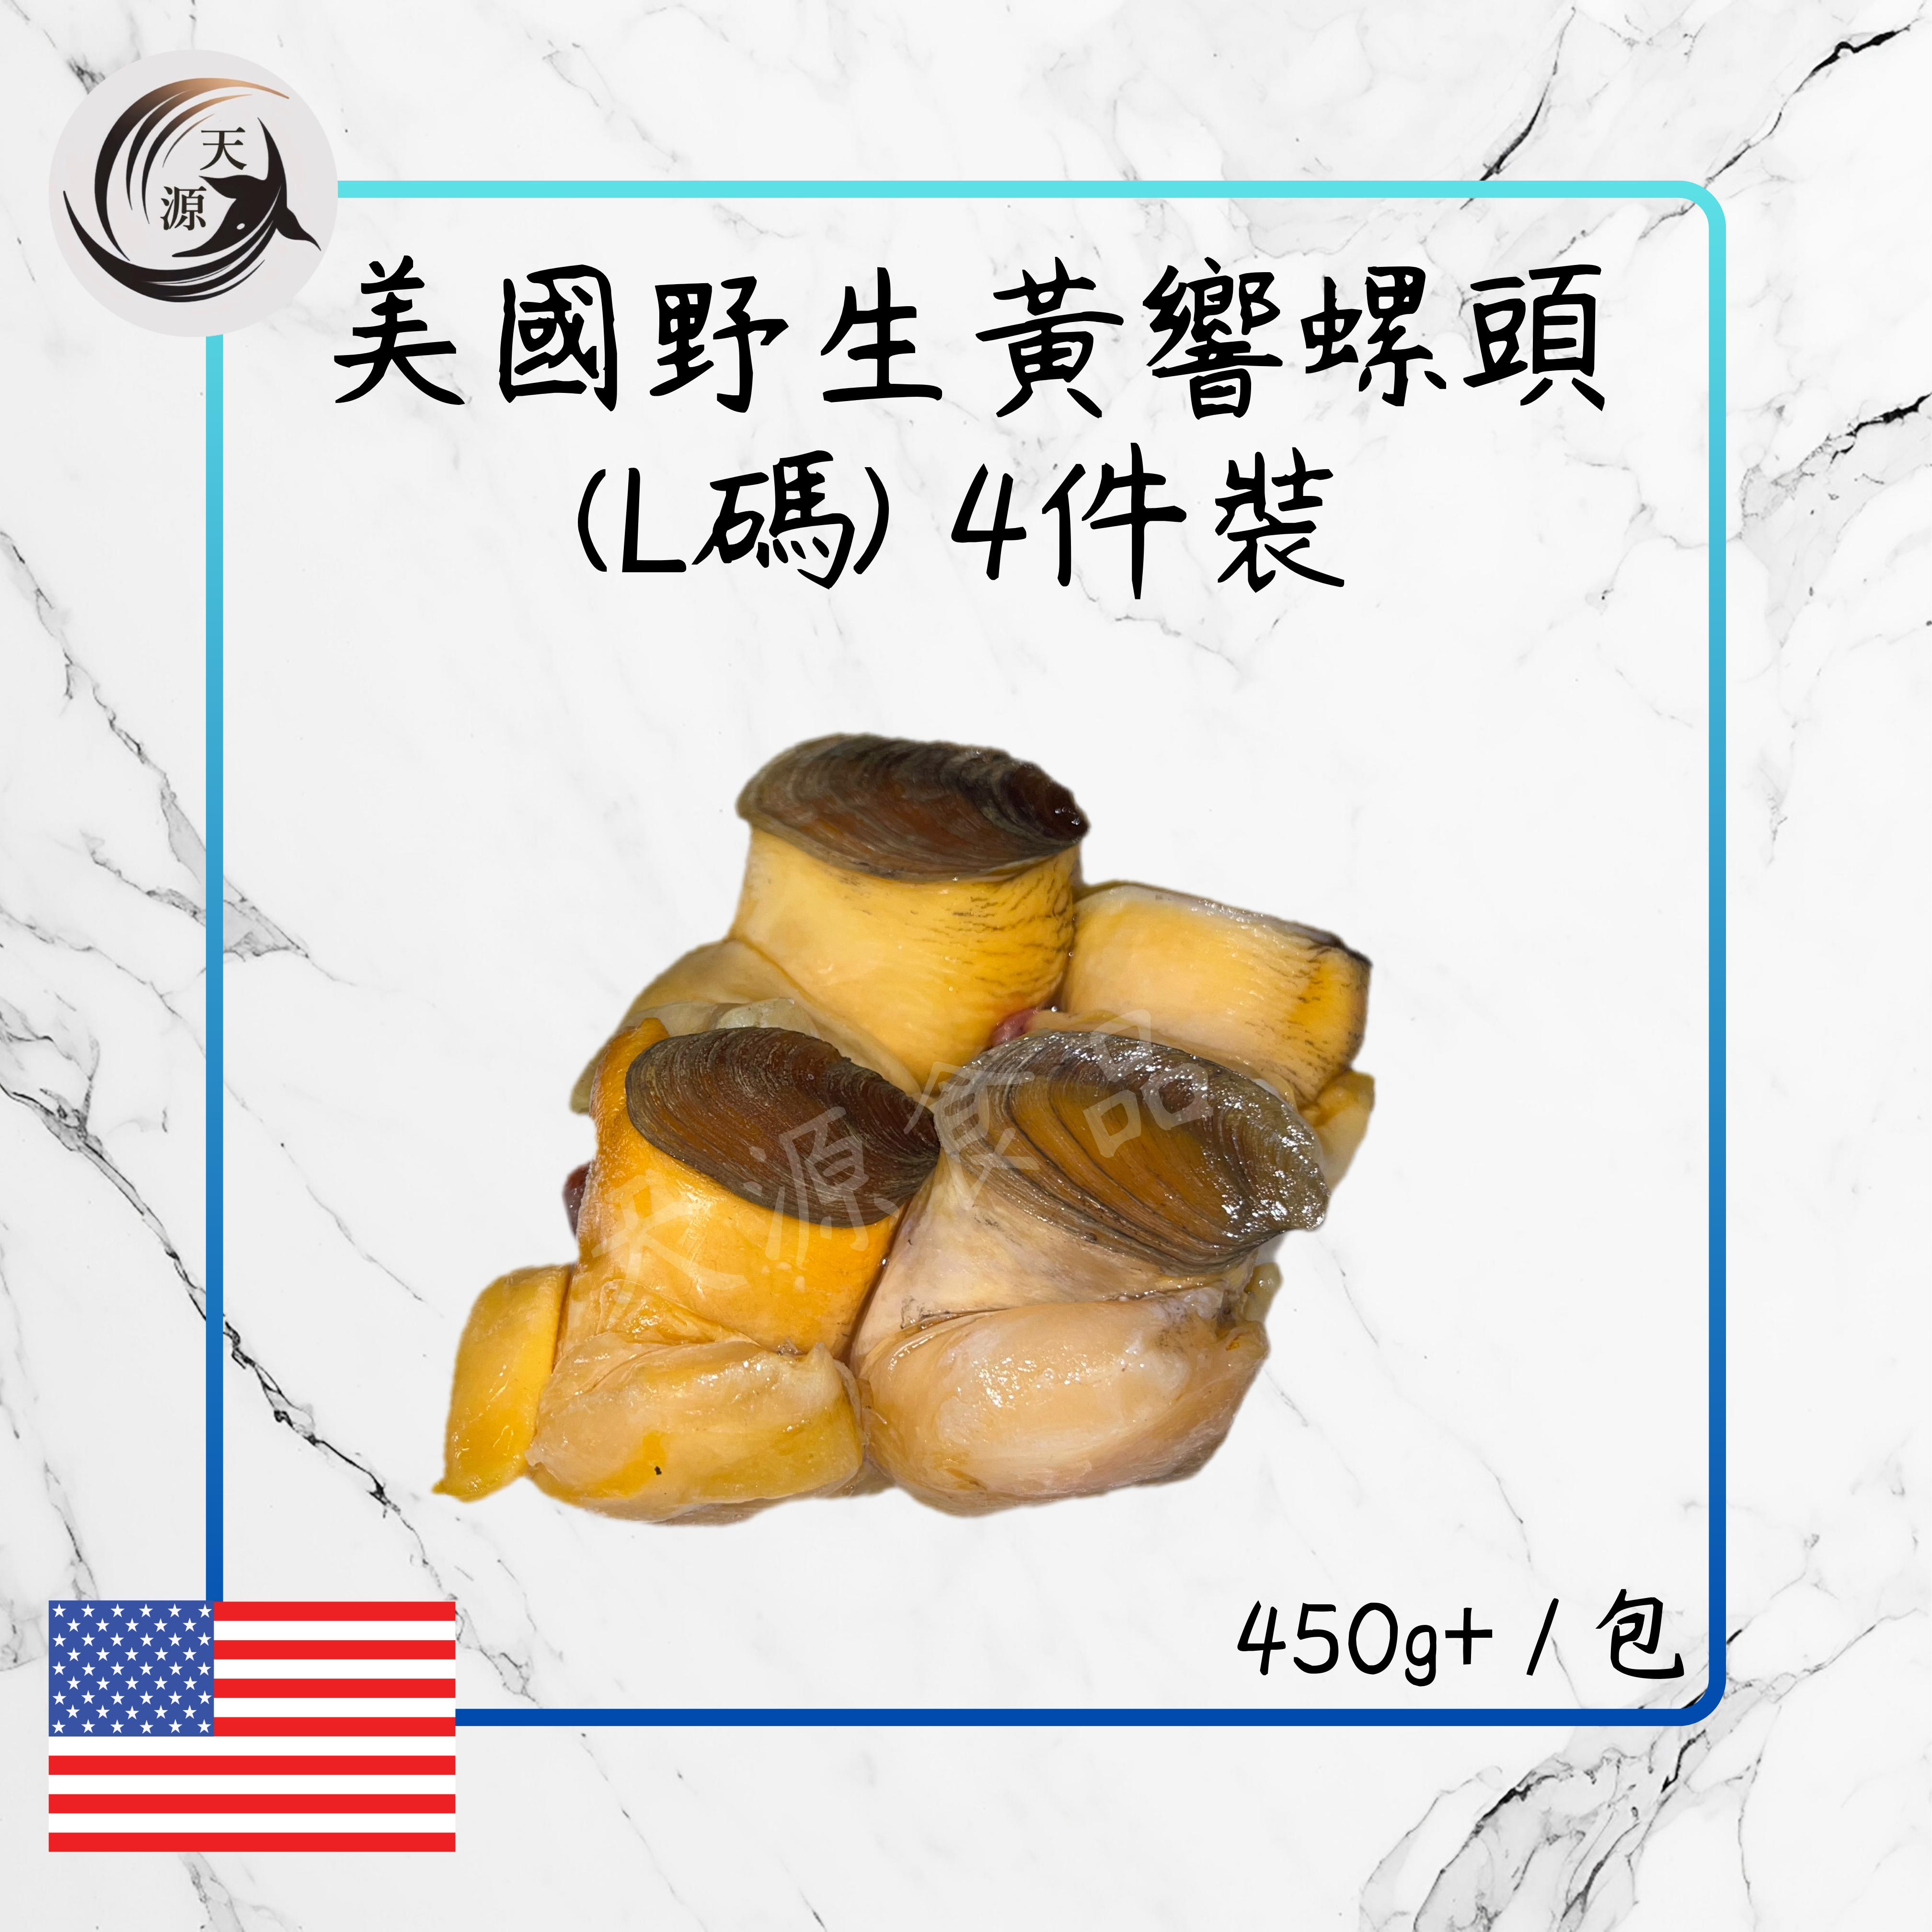 American Wild Yellow Snail Head (L size) 4-pack